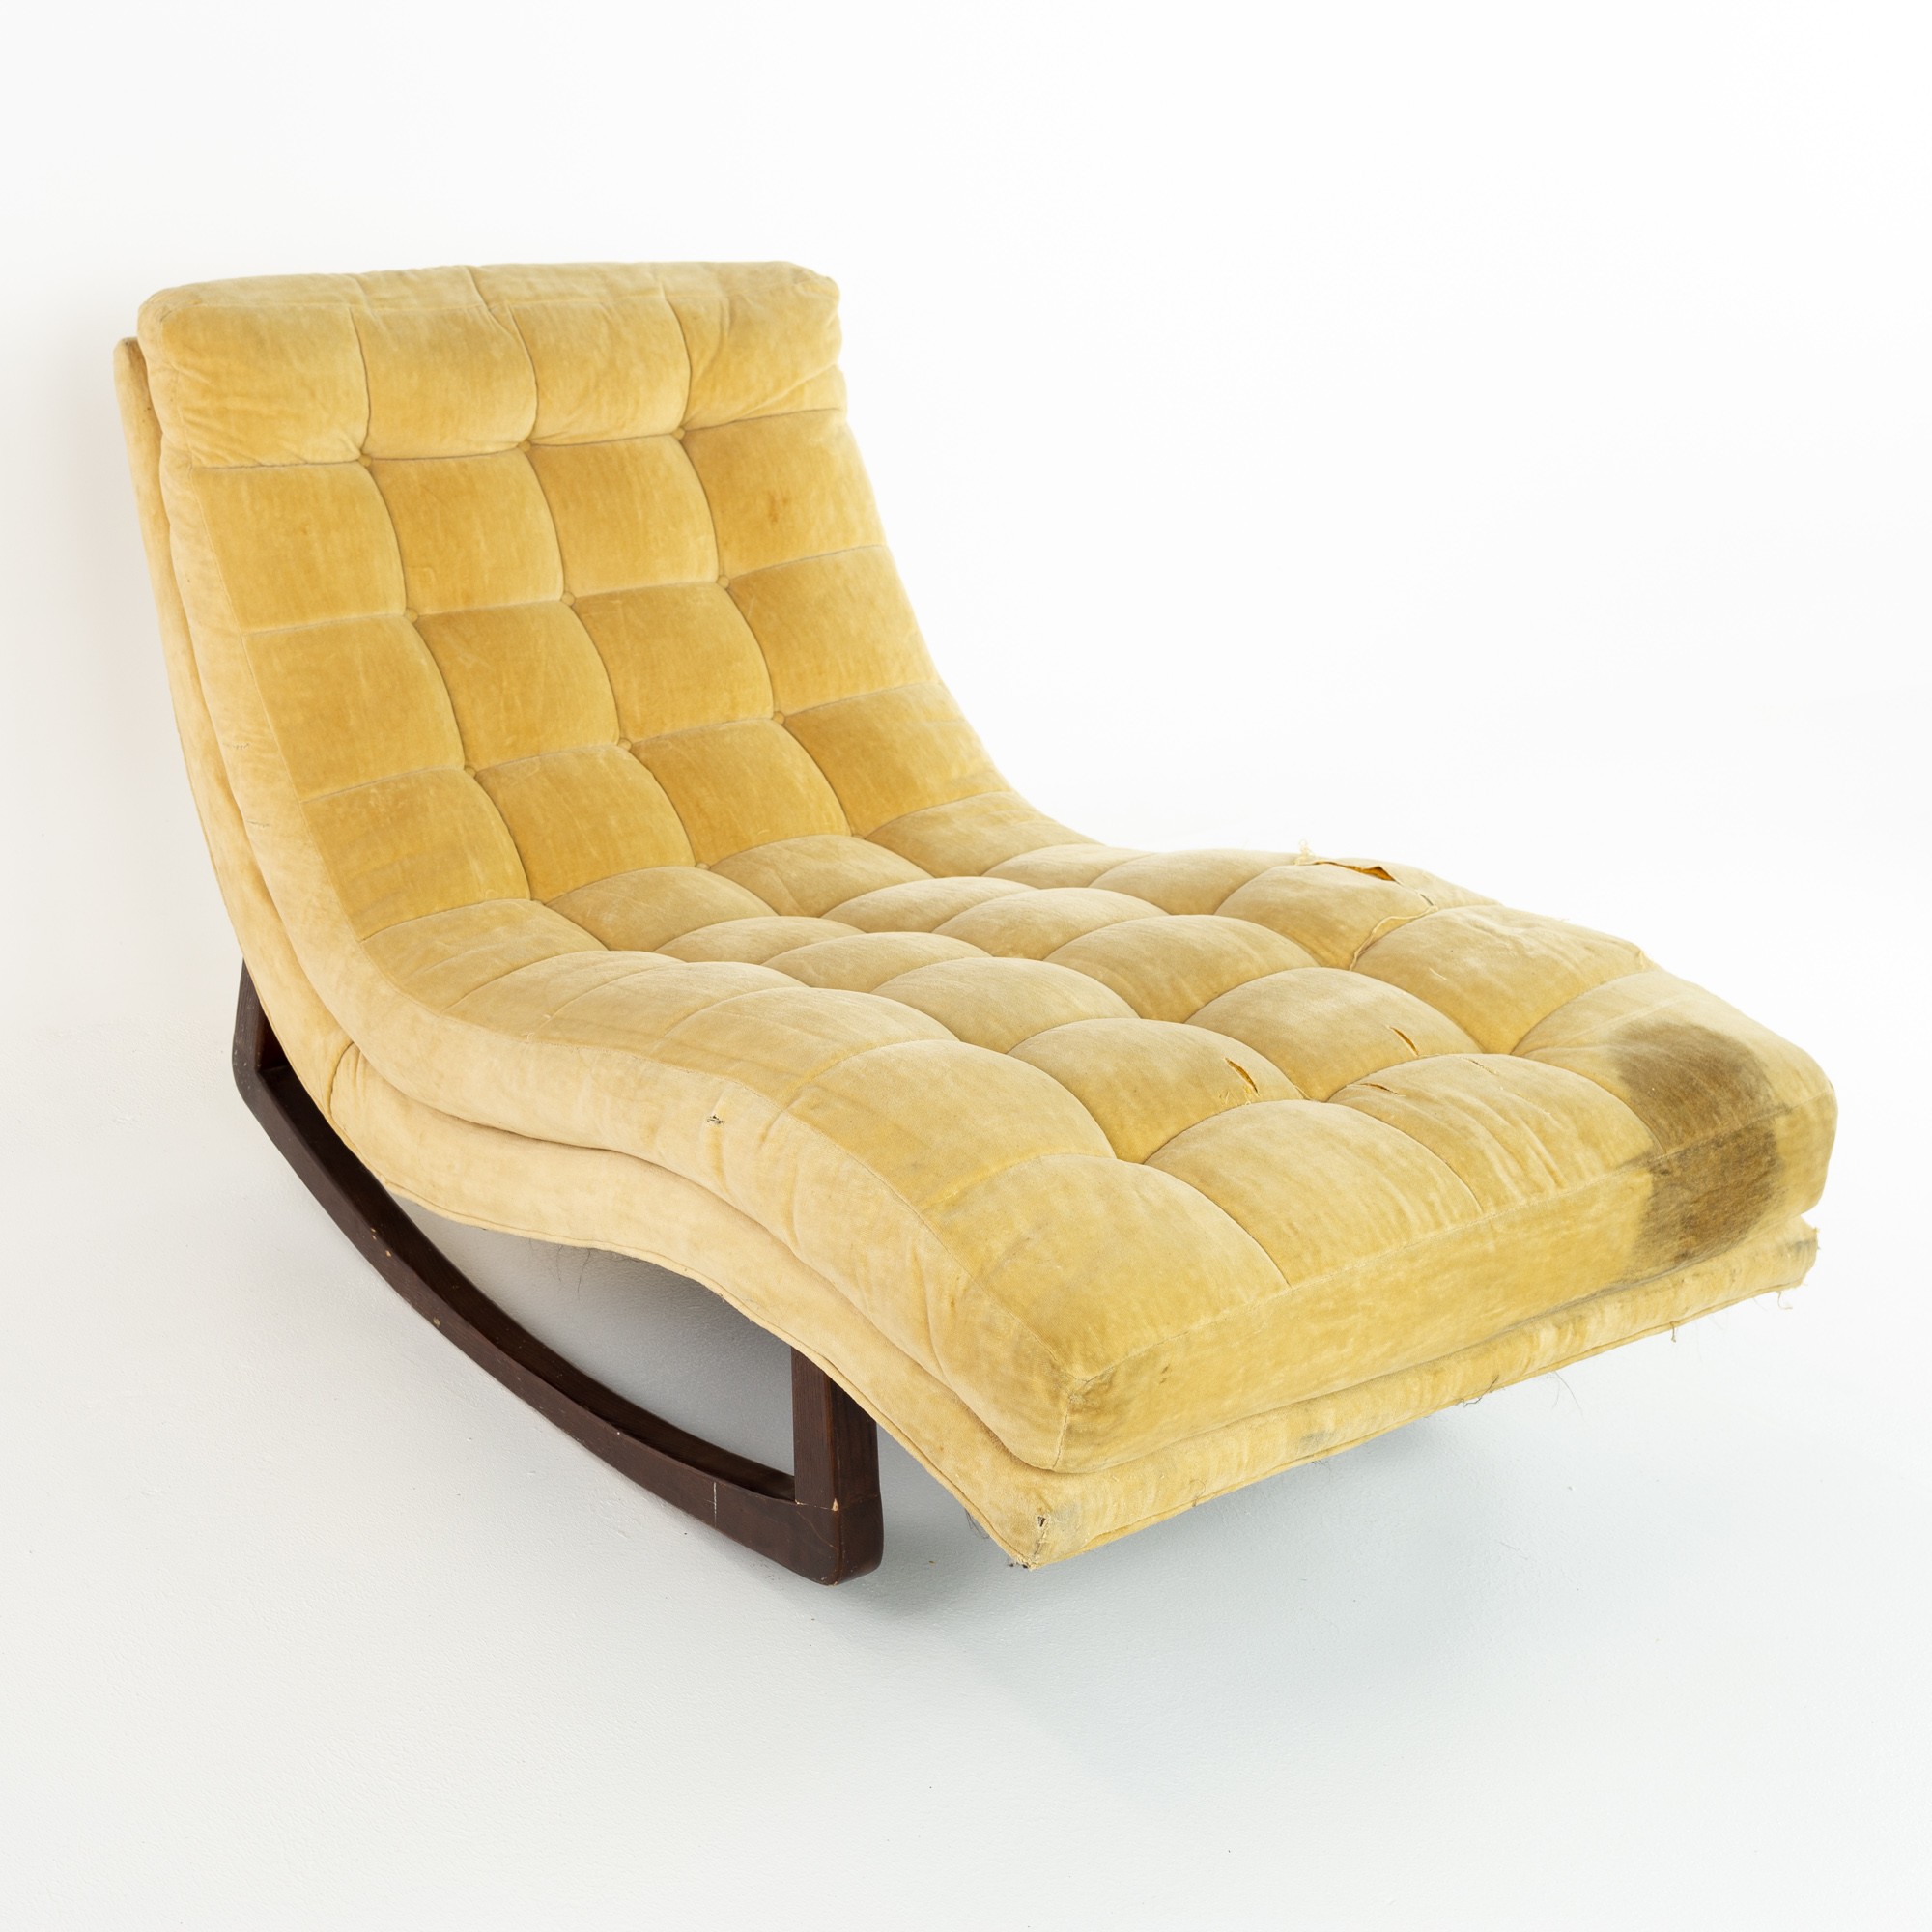 Adrian Pearsall for Craft and Associates Mid Century Rocking Chaise Lounge Chair